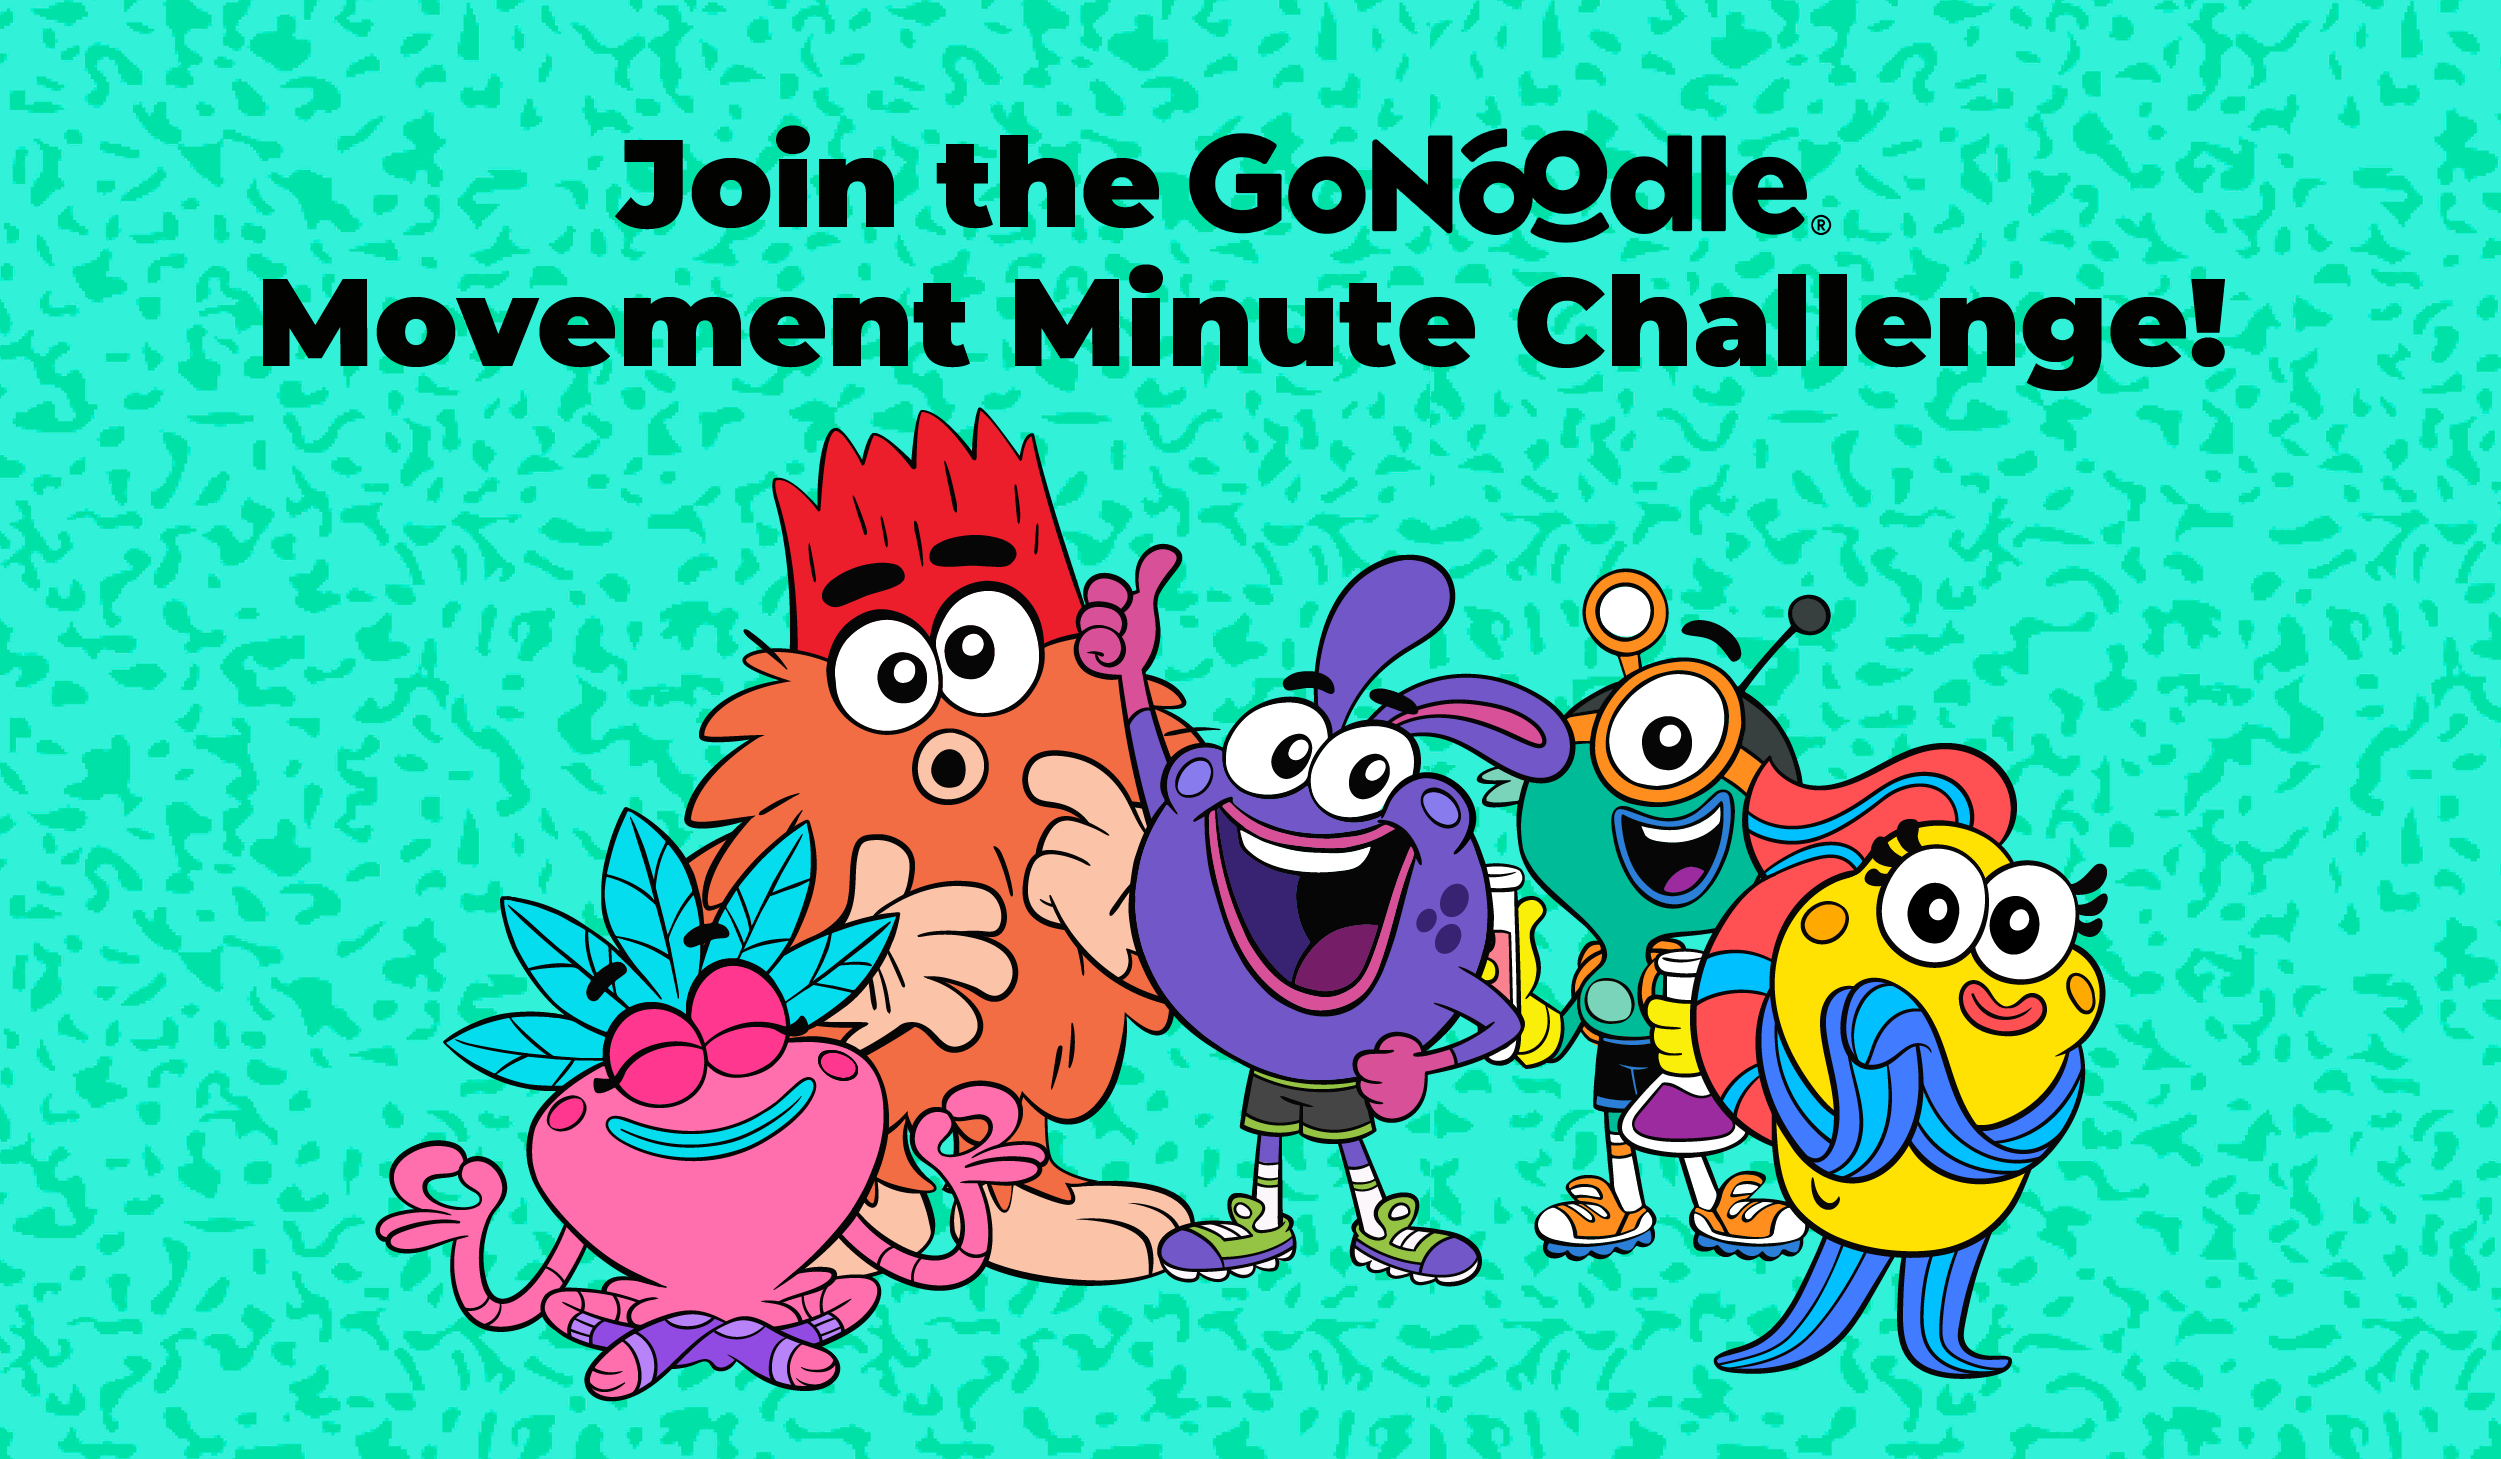 Let’s Get Moving:  Join The GoNoodle Movement Minute Challenge